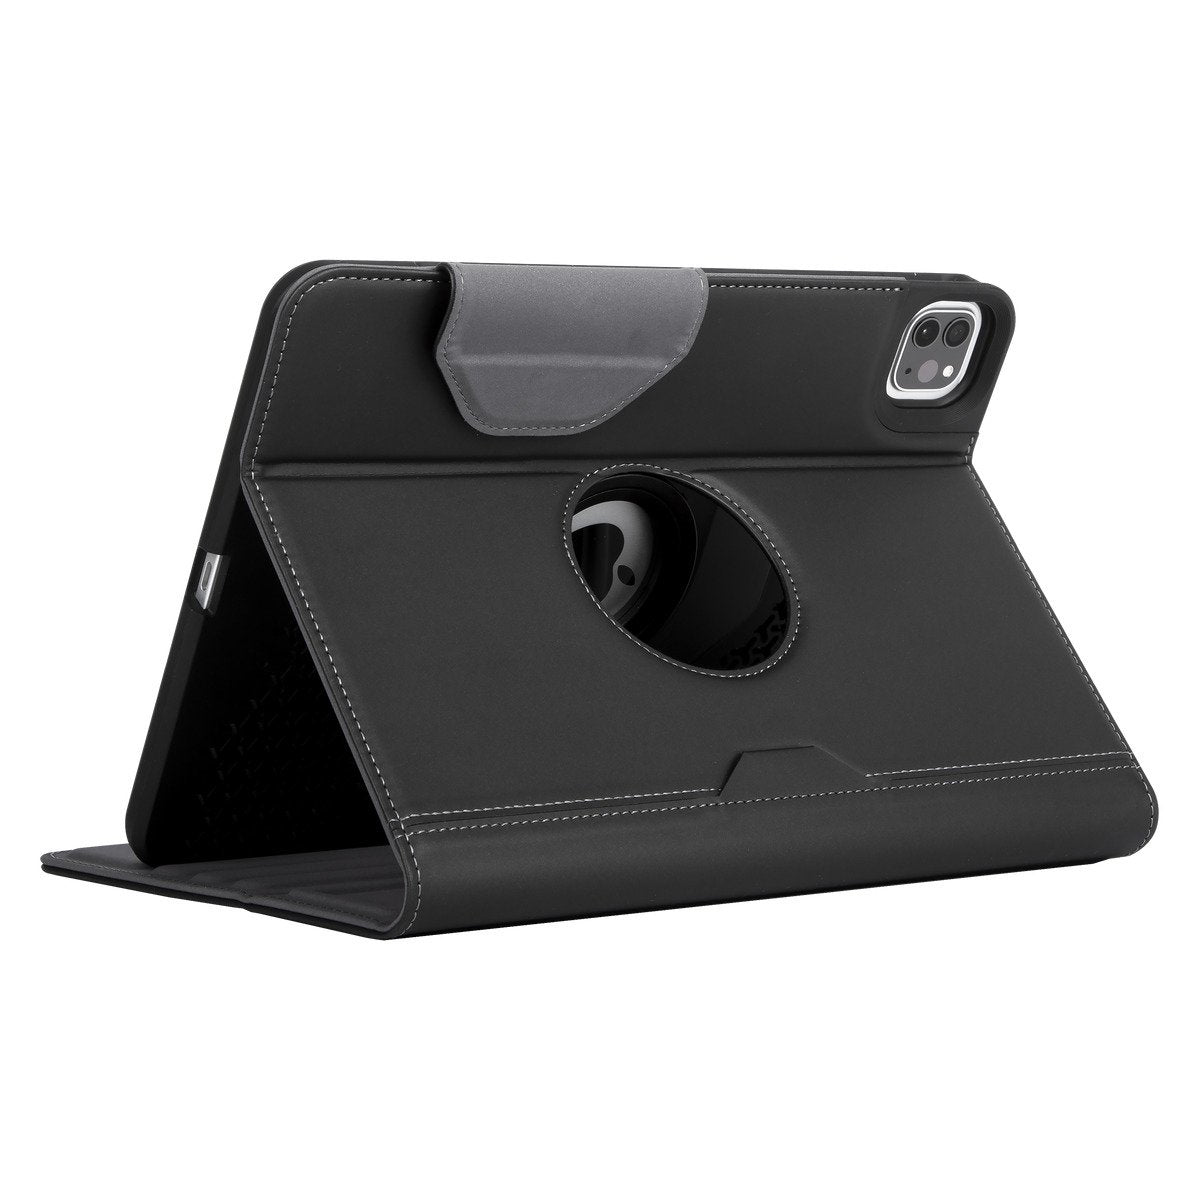 TARGUS VersaVu Classic Case for iPad Air (4th Gen) 10.9" and iPad Pro 11" (2nd and 1st Gen) (Black|Charcoal) (THZ867GL) TARGUS